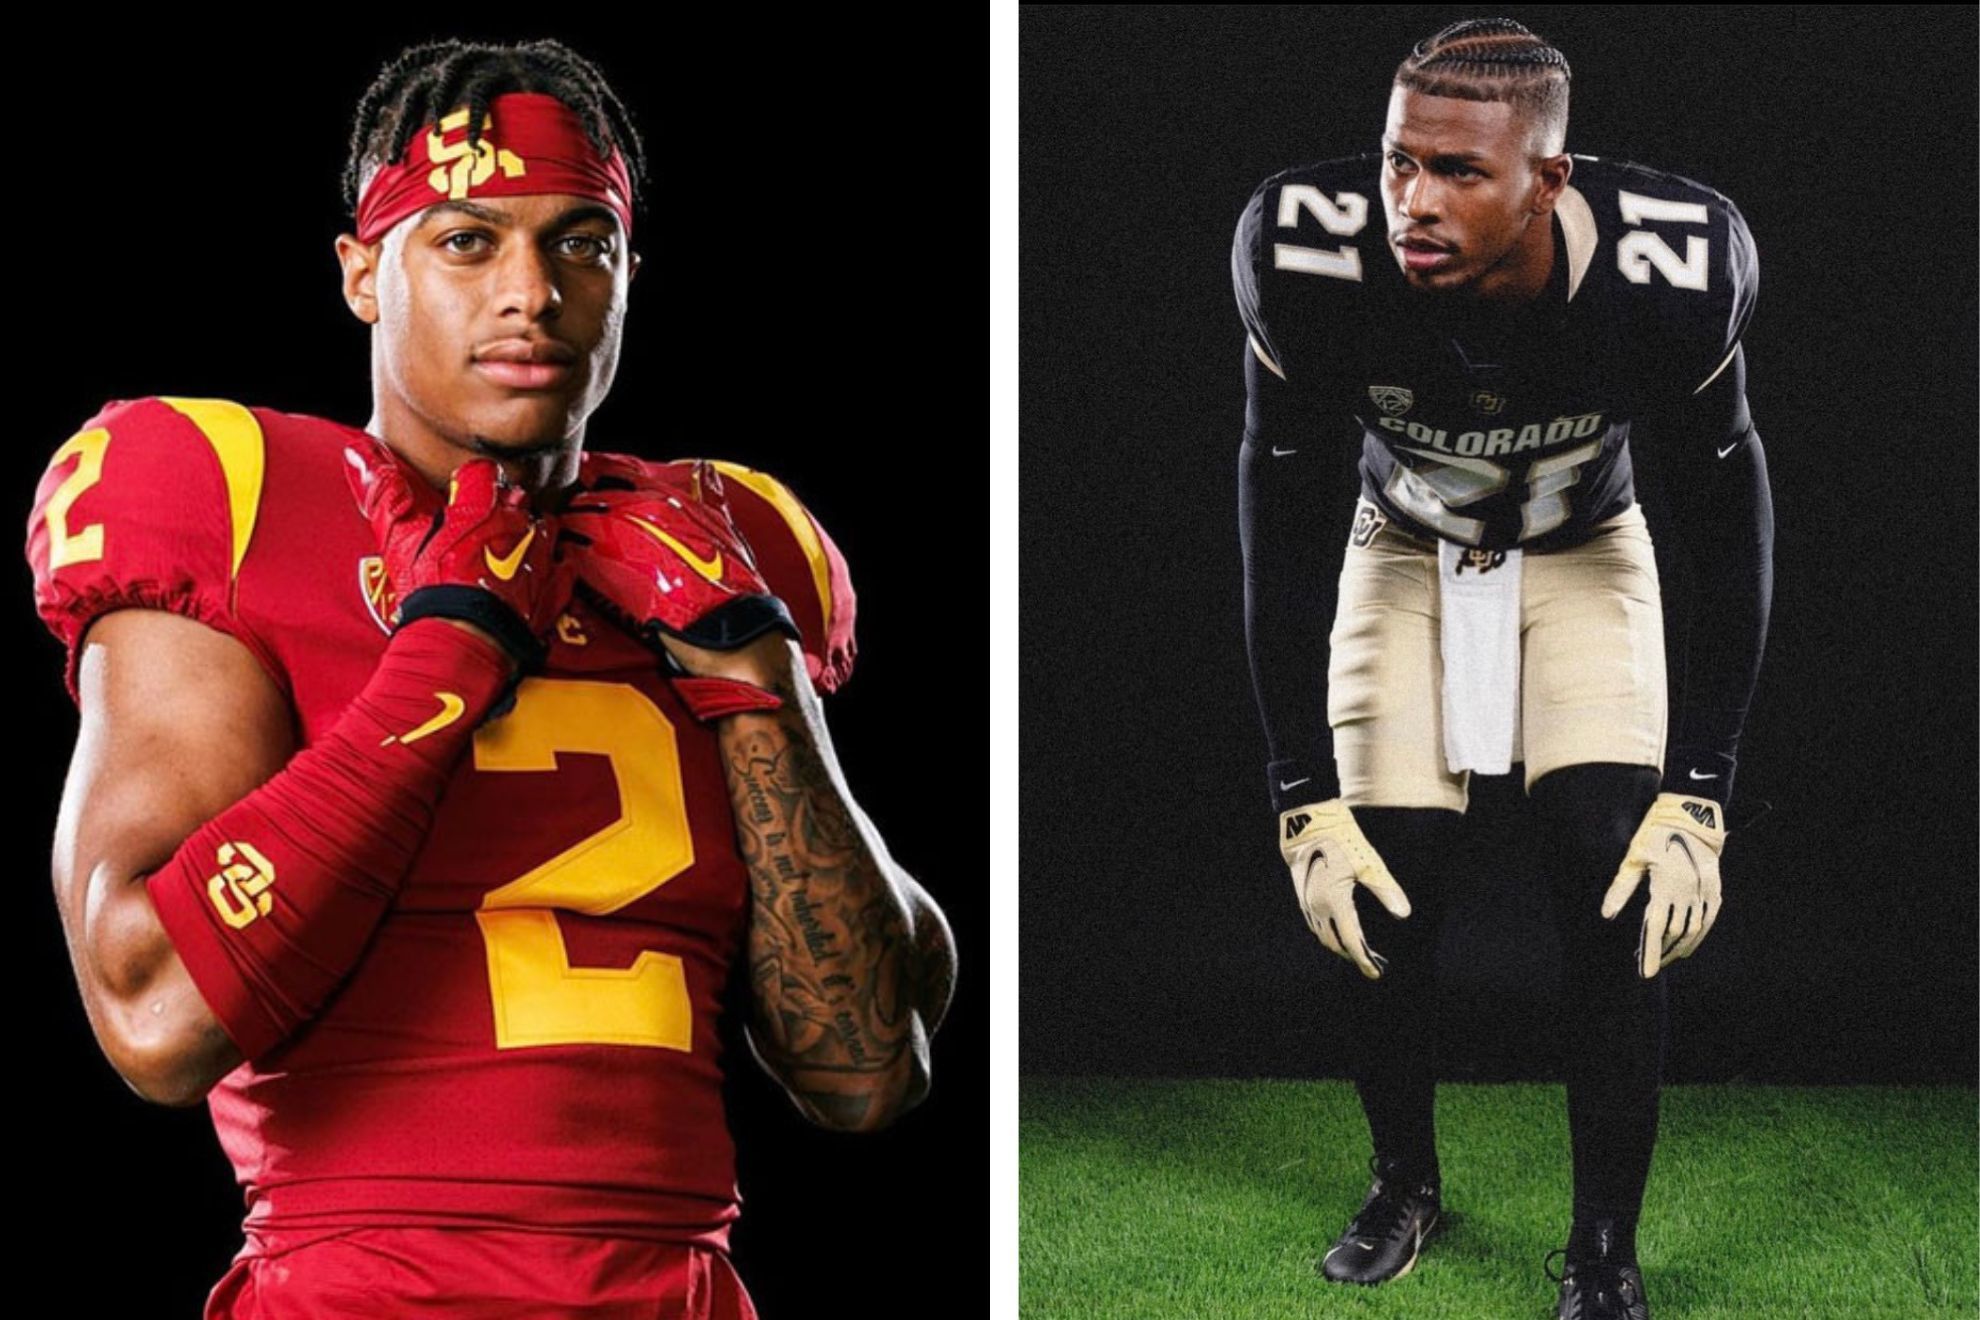 A new rivalry will take the field in the PAC-12 this season